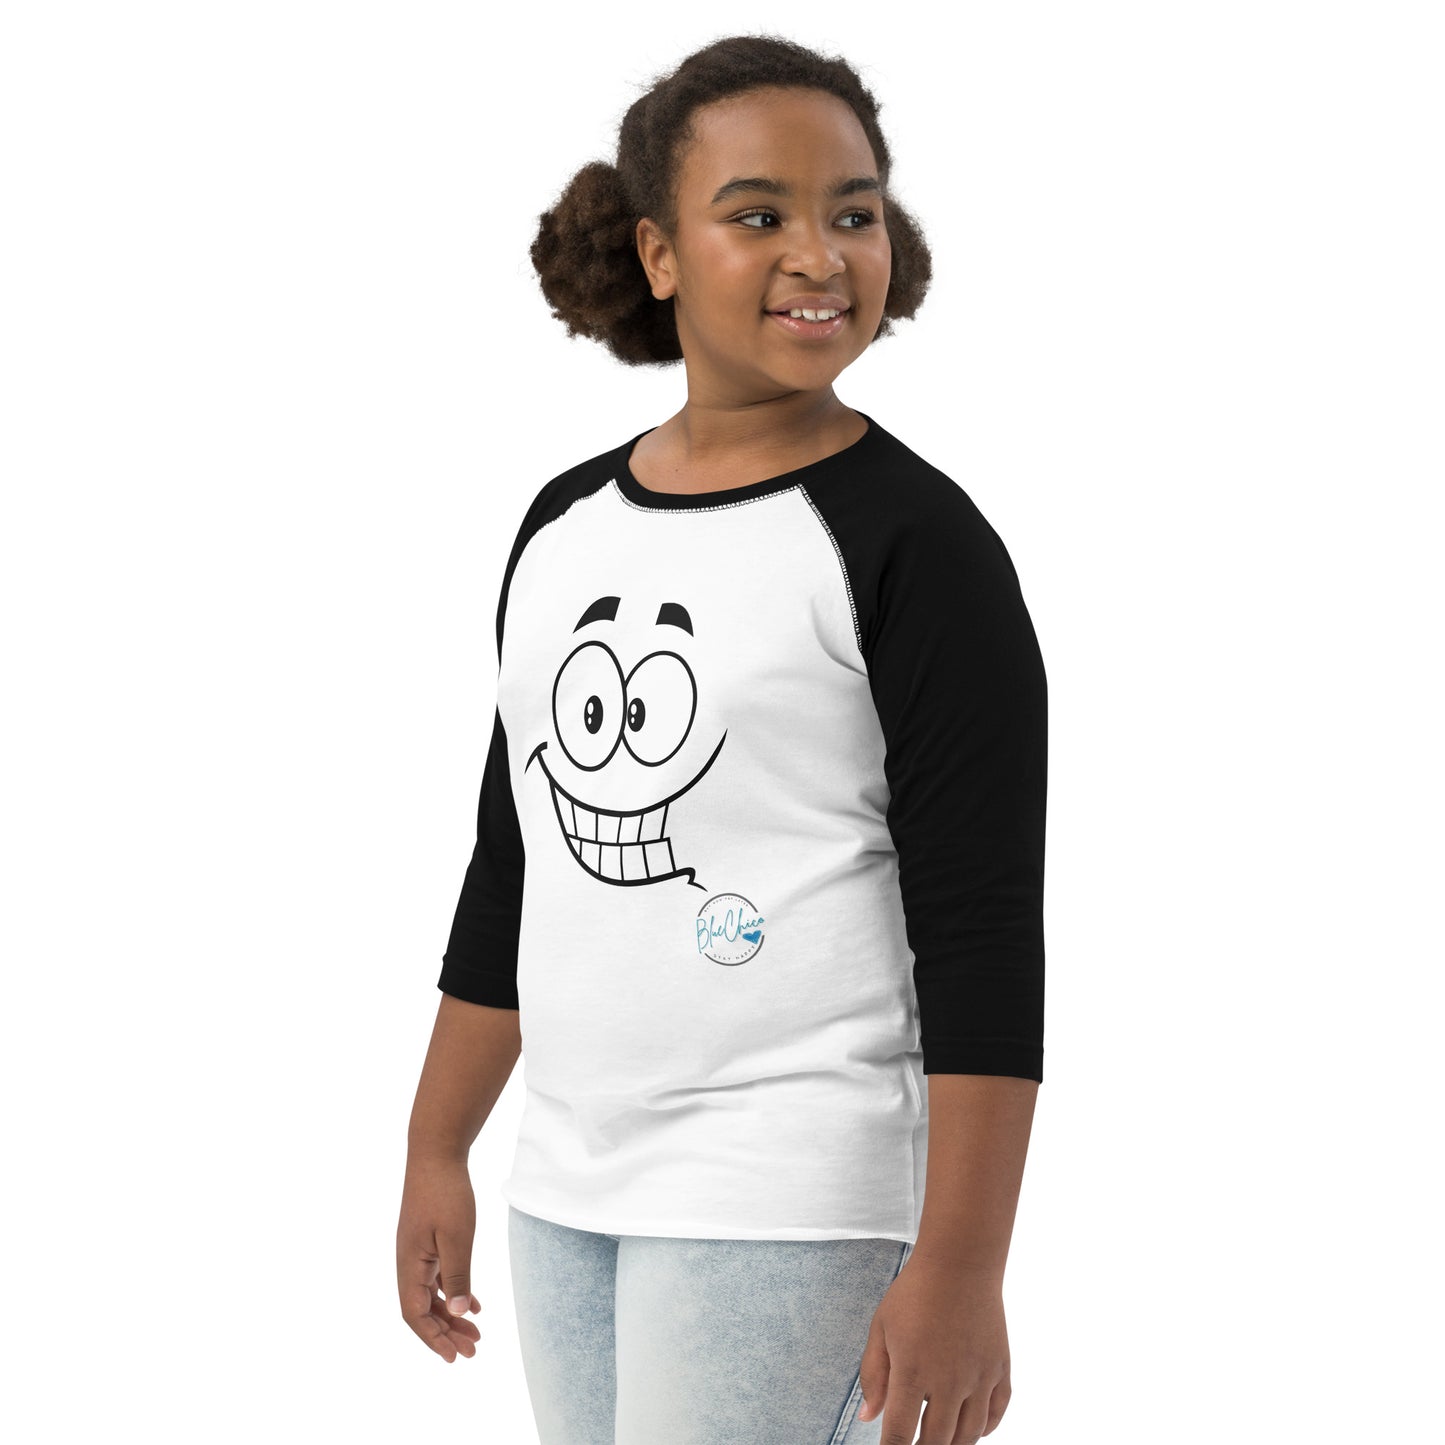 W'Sup Smile Youth Tee